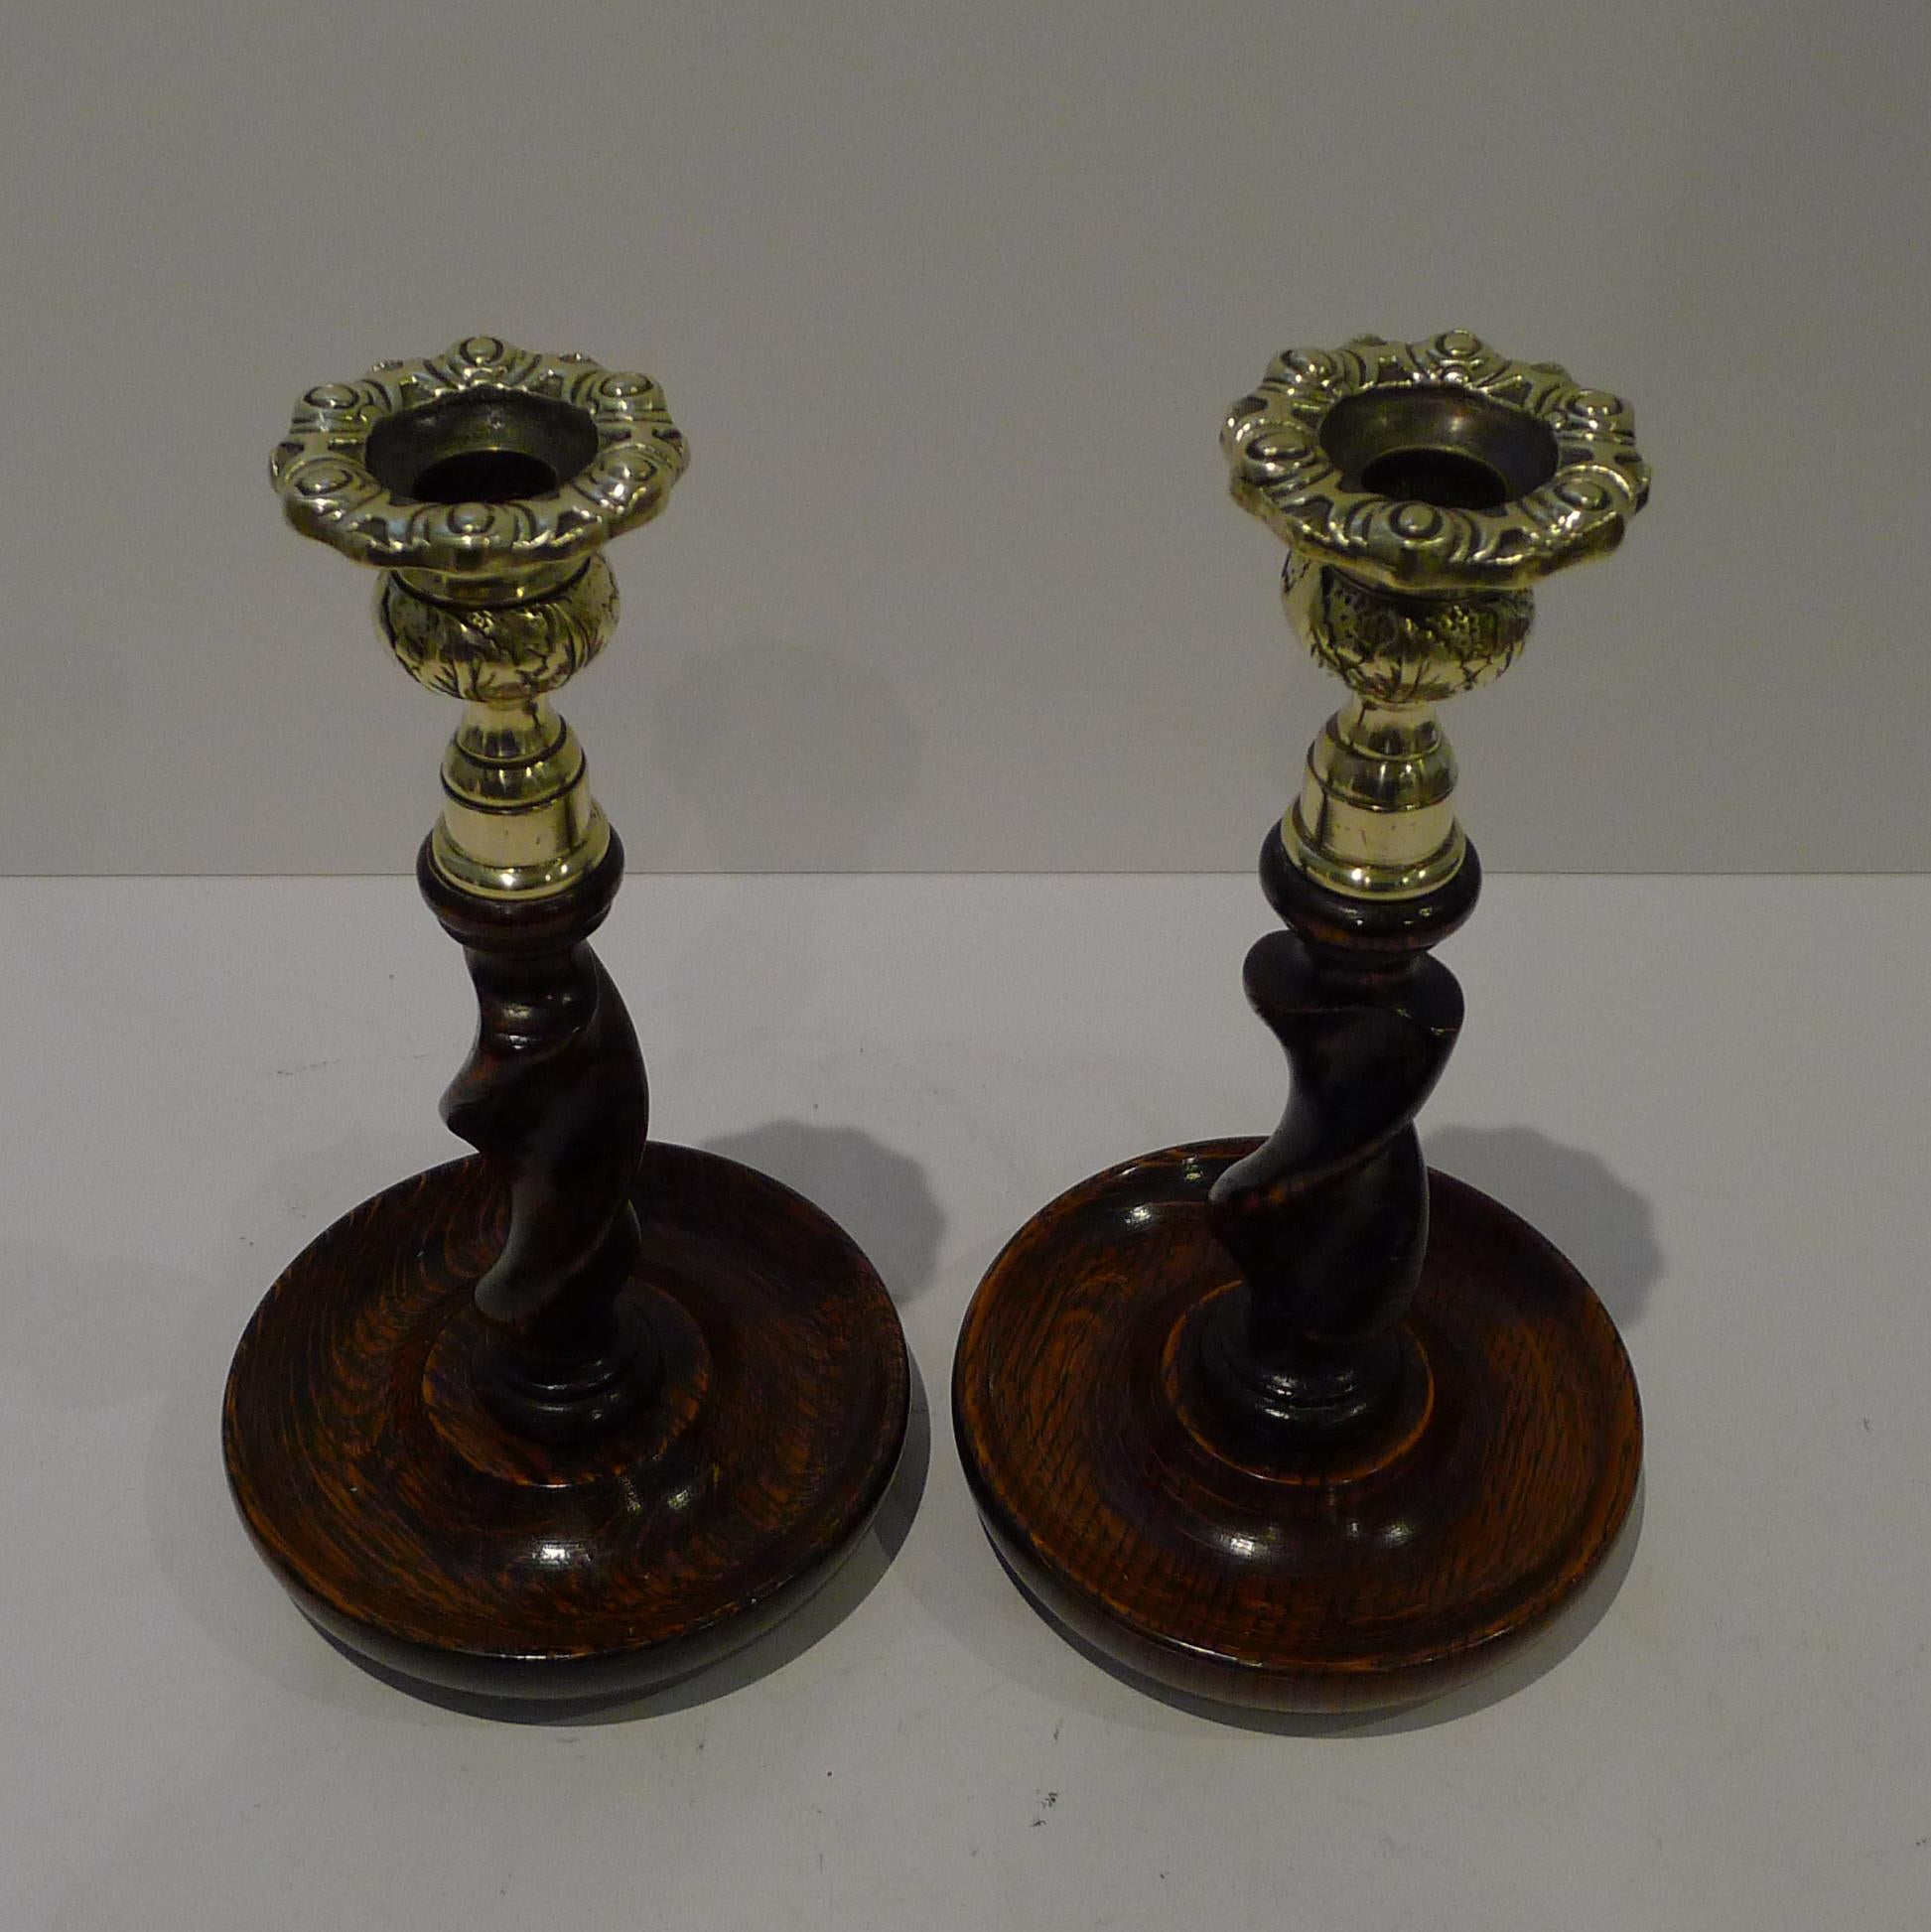 A wonderful pair of wooden candlesticks, always a winning combination, polished Oak and brass.

The English Oak has been skillfully carved in a spiraling barley twist design. The cast brass tops in the form of Scottish thistle form, protect the wood